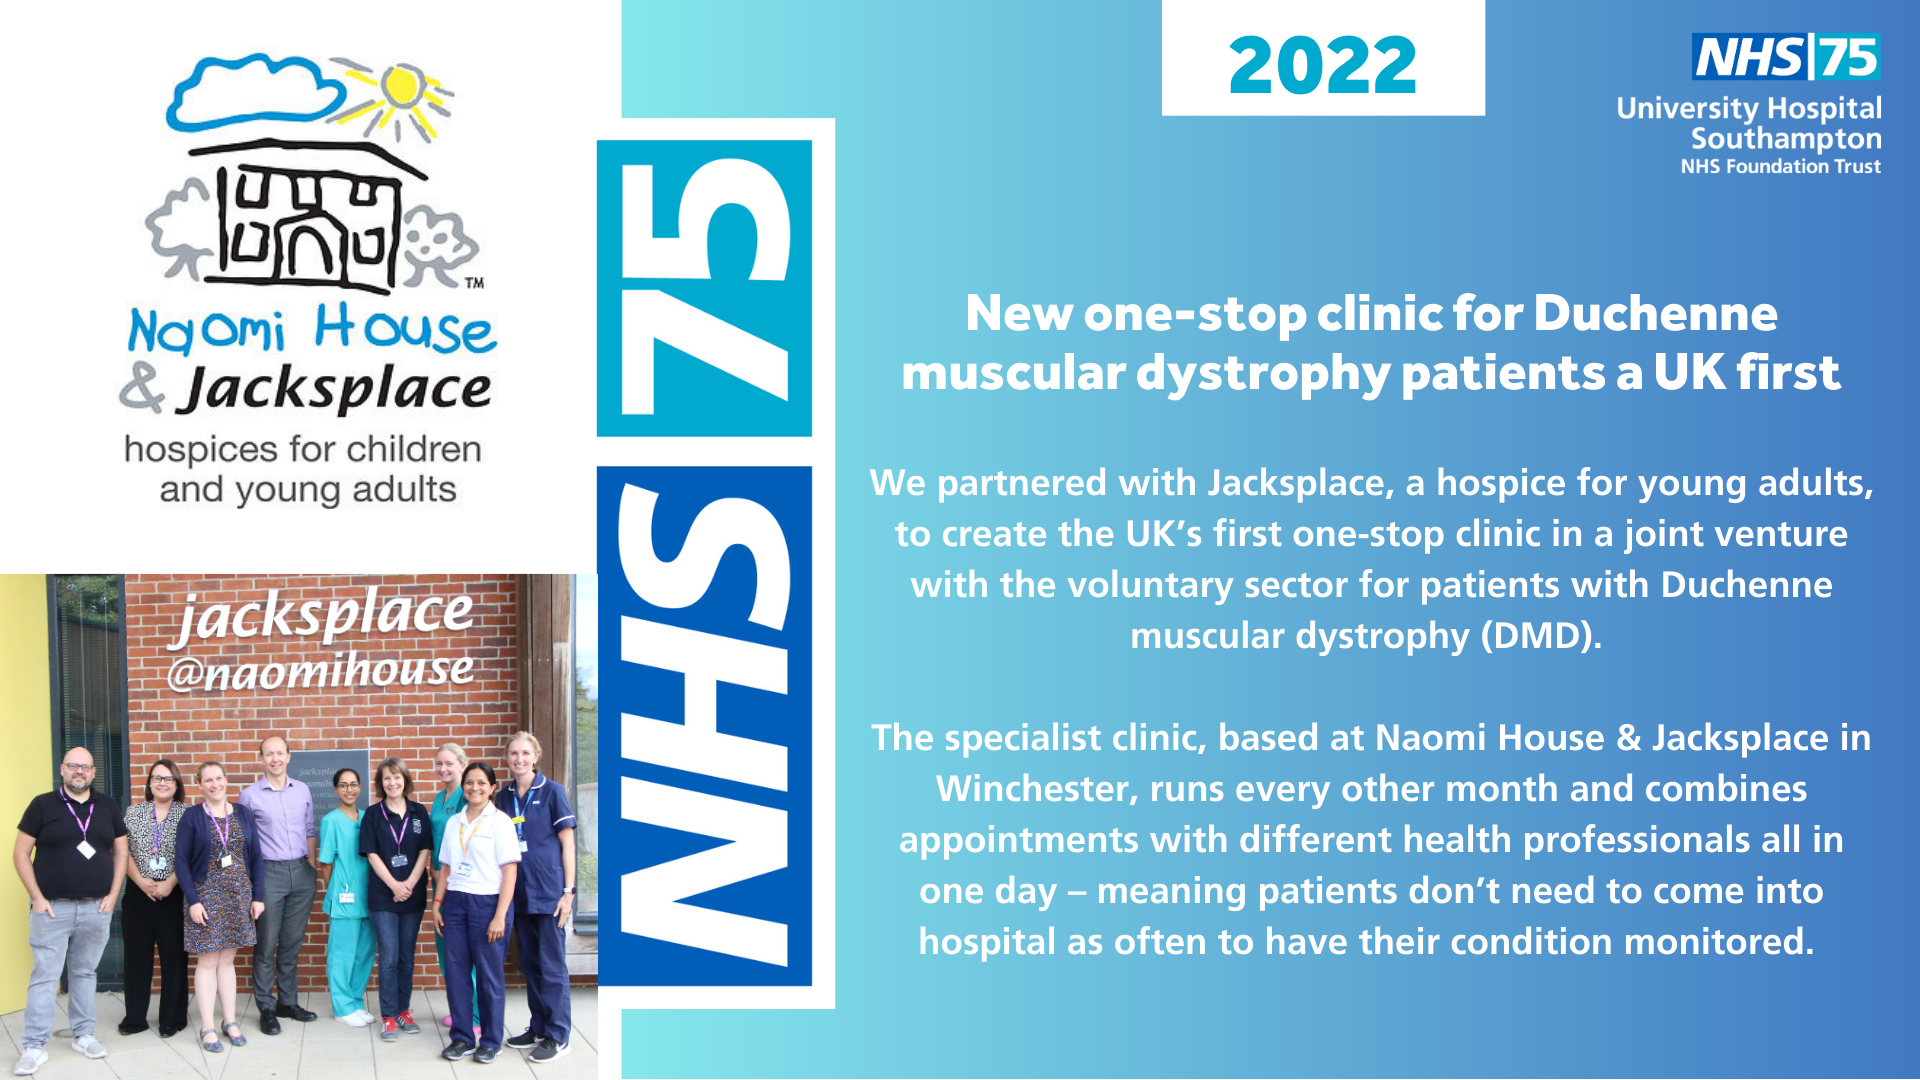 New one-stop clinic for Duchenne muscular dystrophy patients a UK first